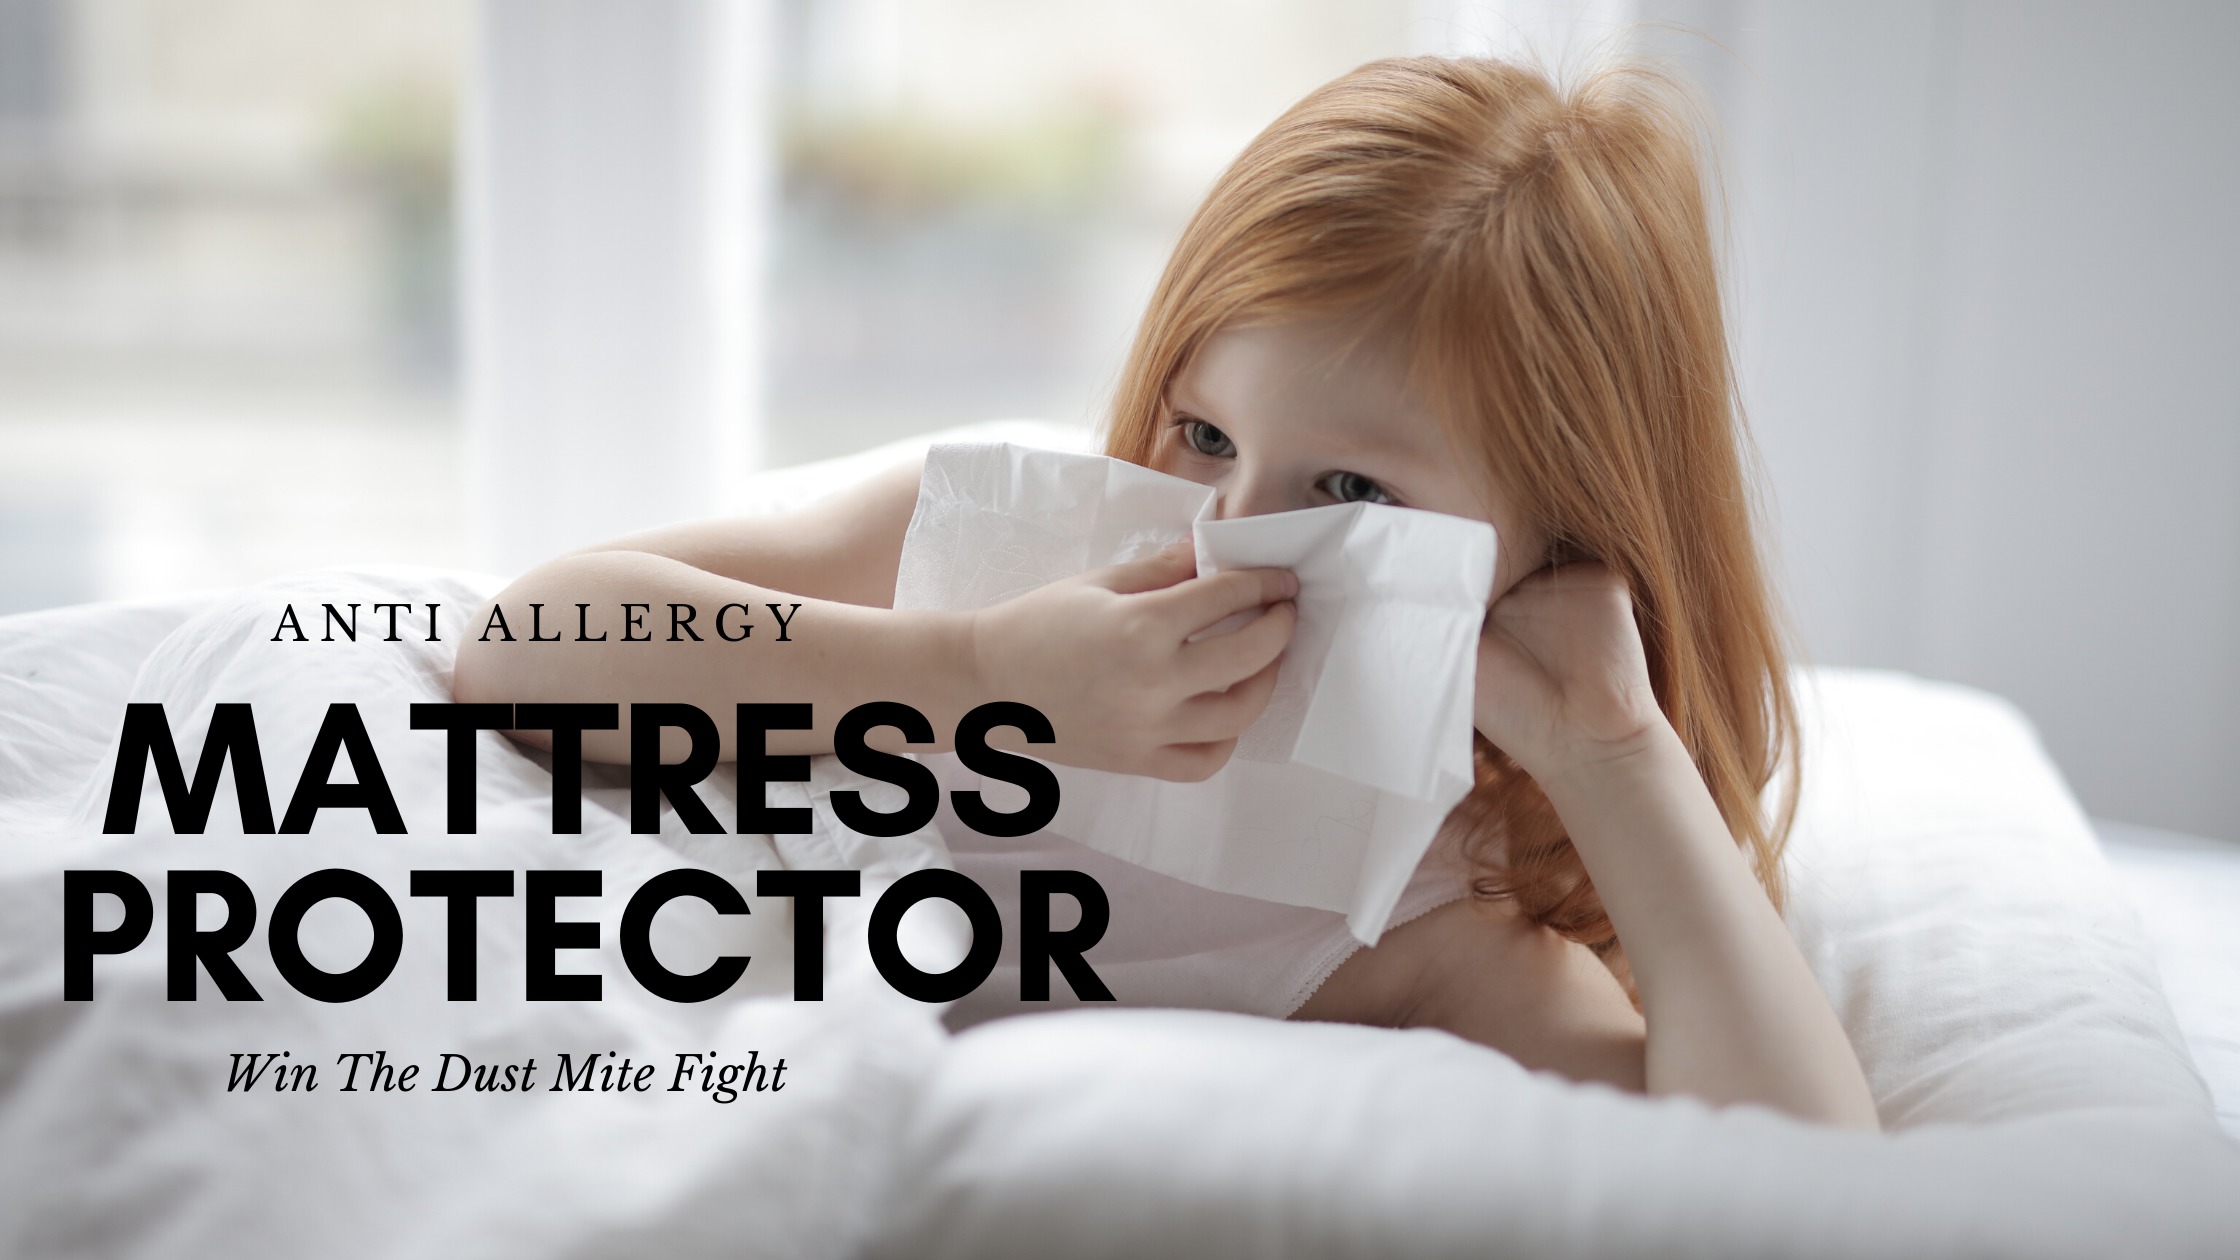 Anti Allergy Mattress Protector - Cover Image